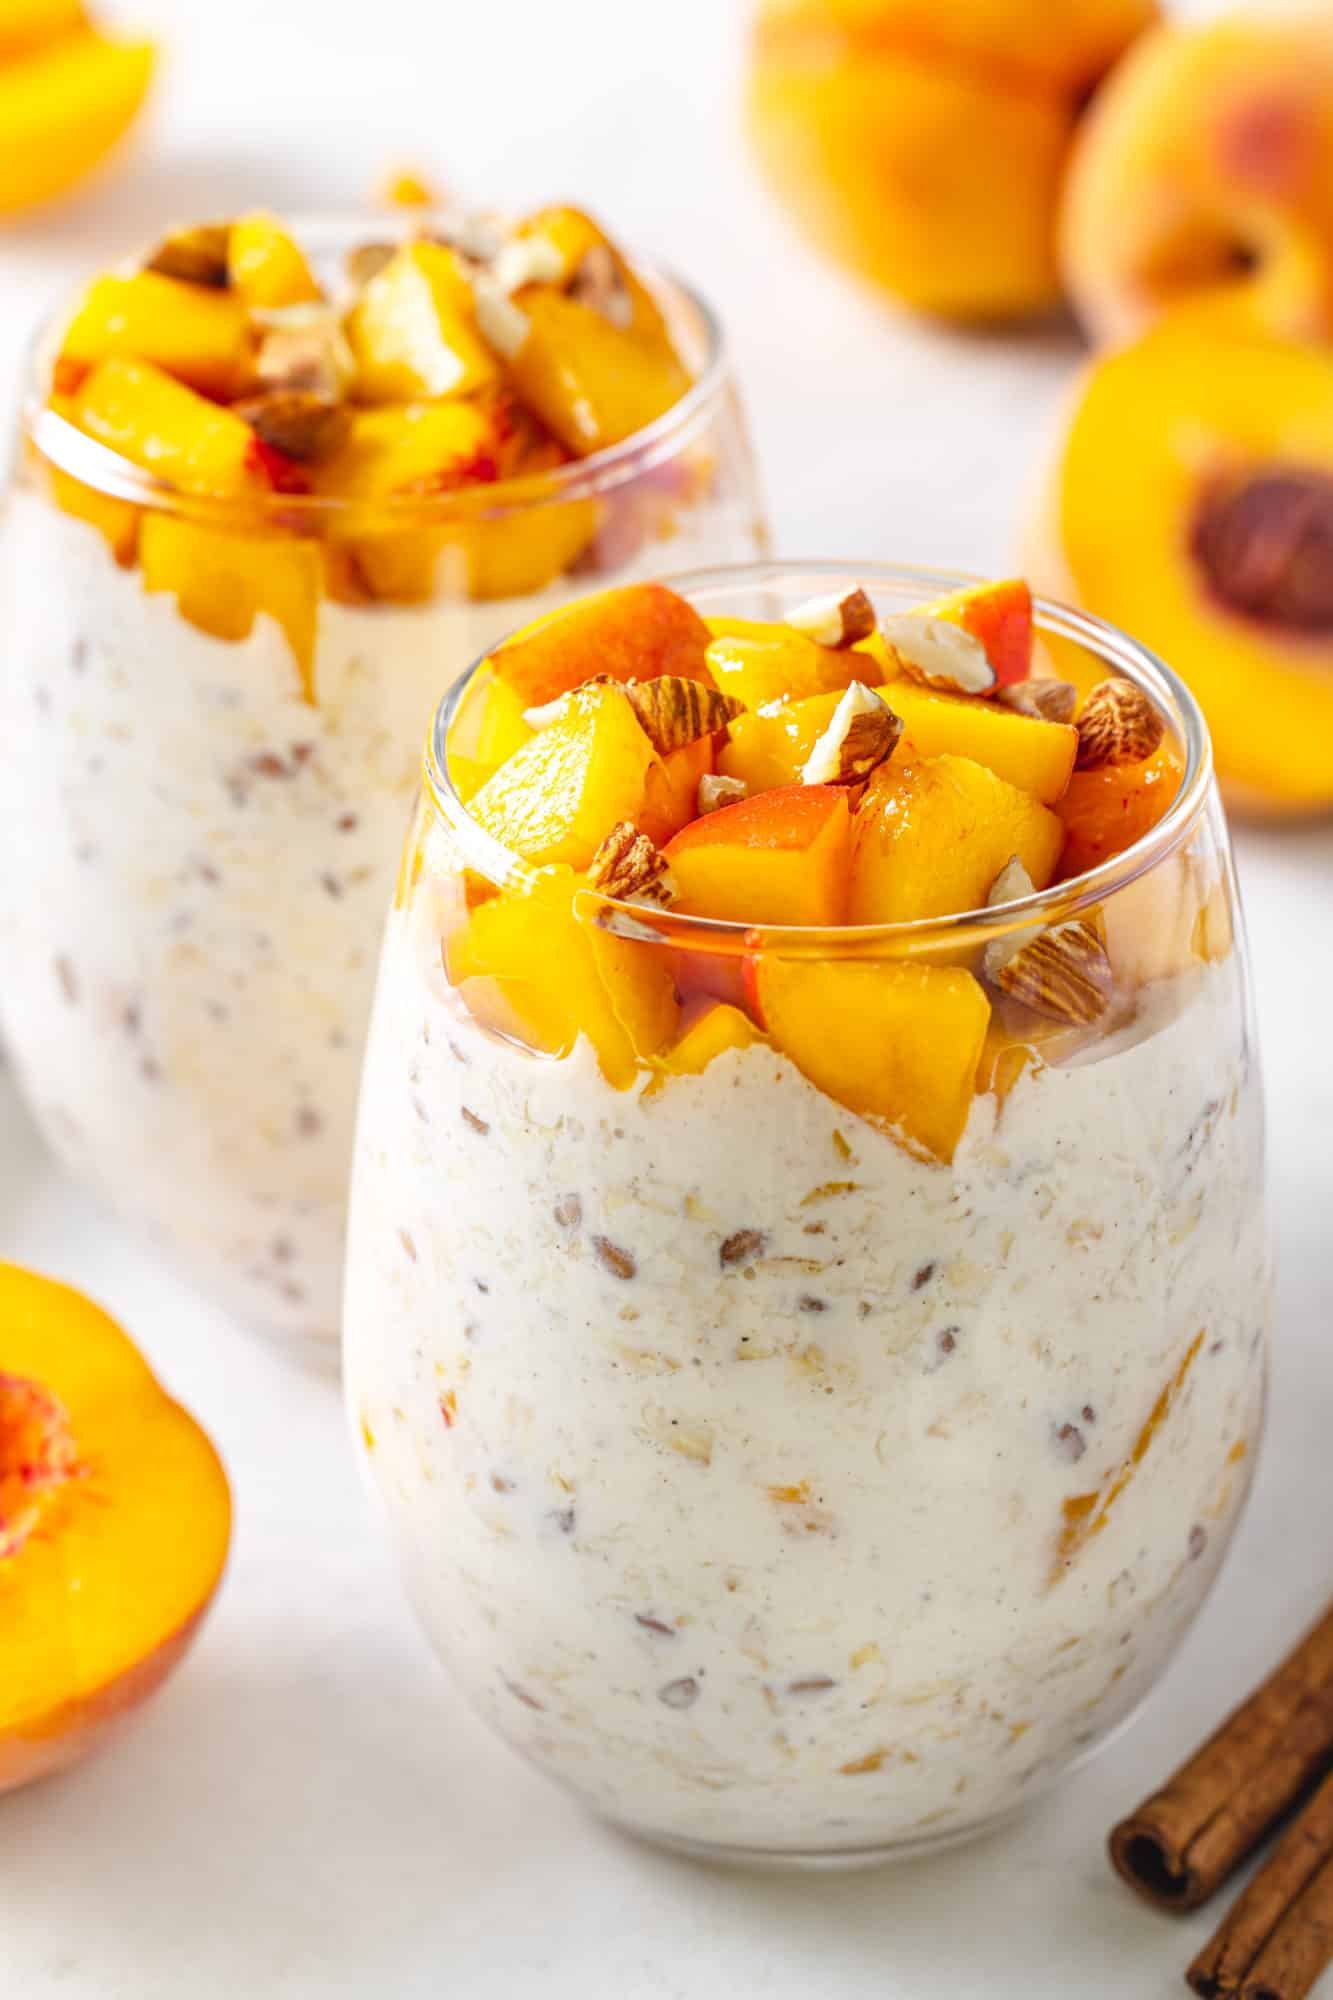 peach overnight oats on a marble board with whole peaches and cinnamon sticks seen in the background